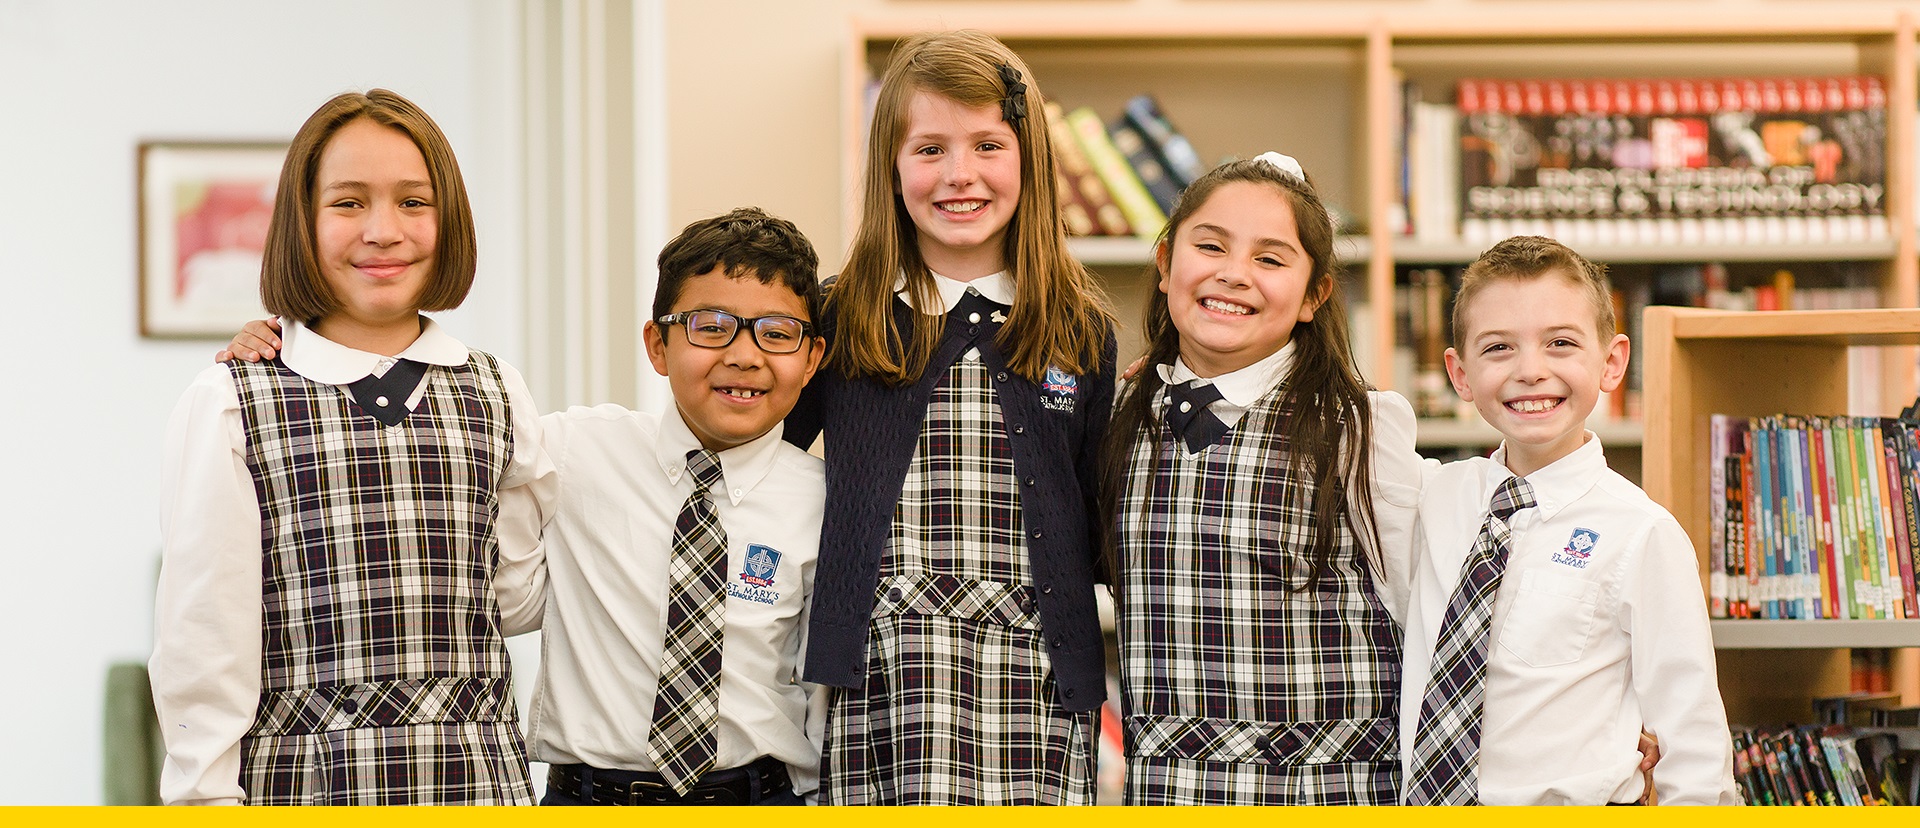 Diverse group of smiling students standing in the library while wearing St. Mary's Catholic School uniforms